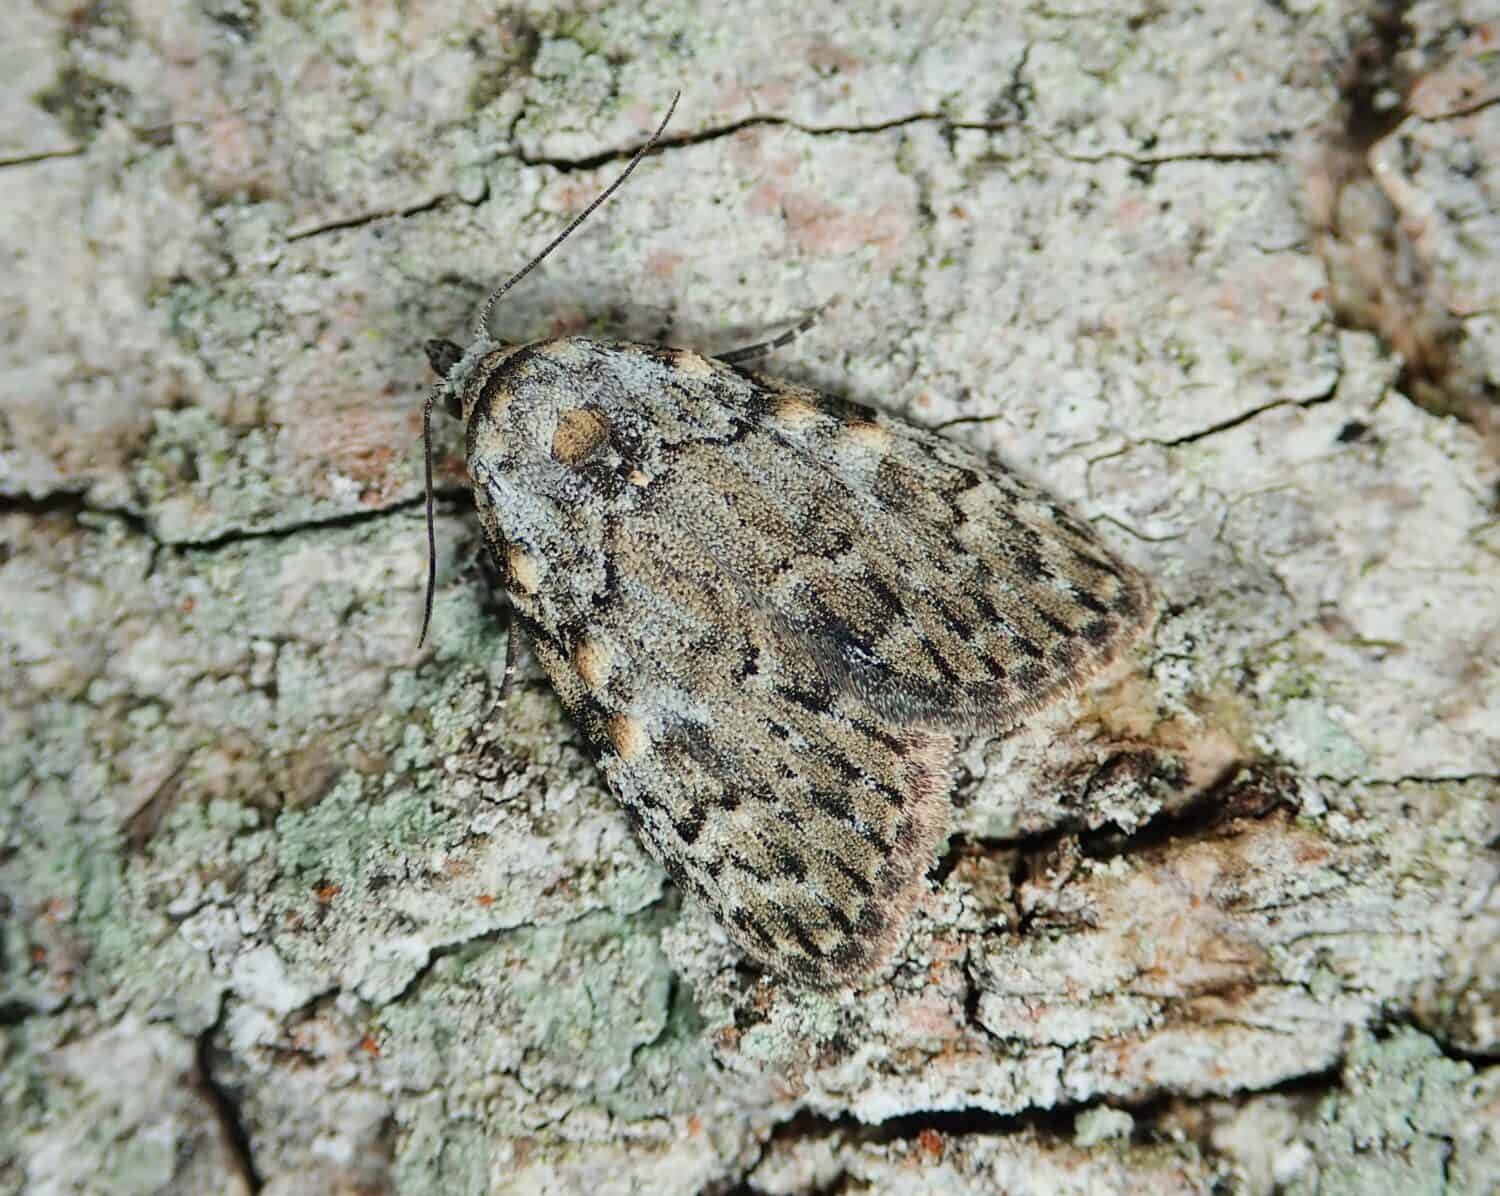 Small Black Arches moth Meganola strigula, camouflaged on the bark of a tree trunk